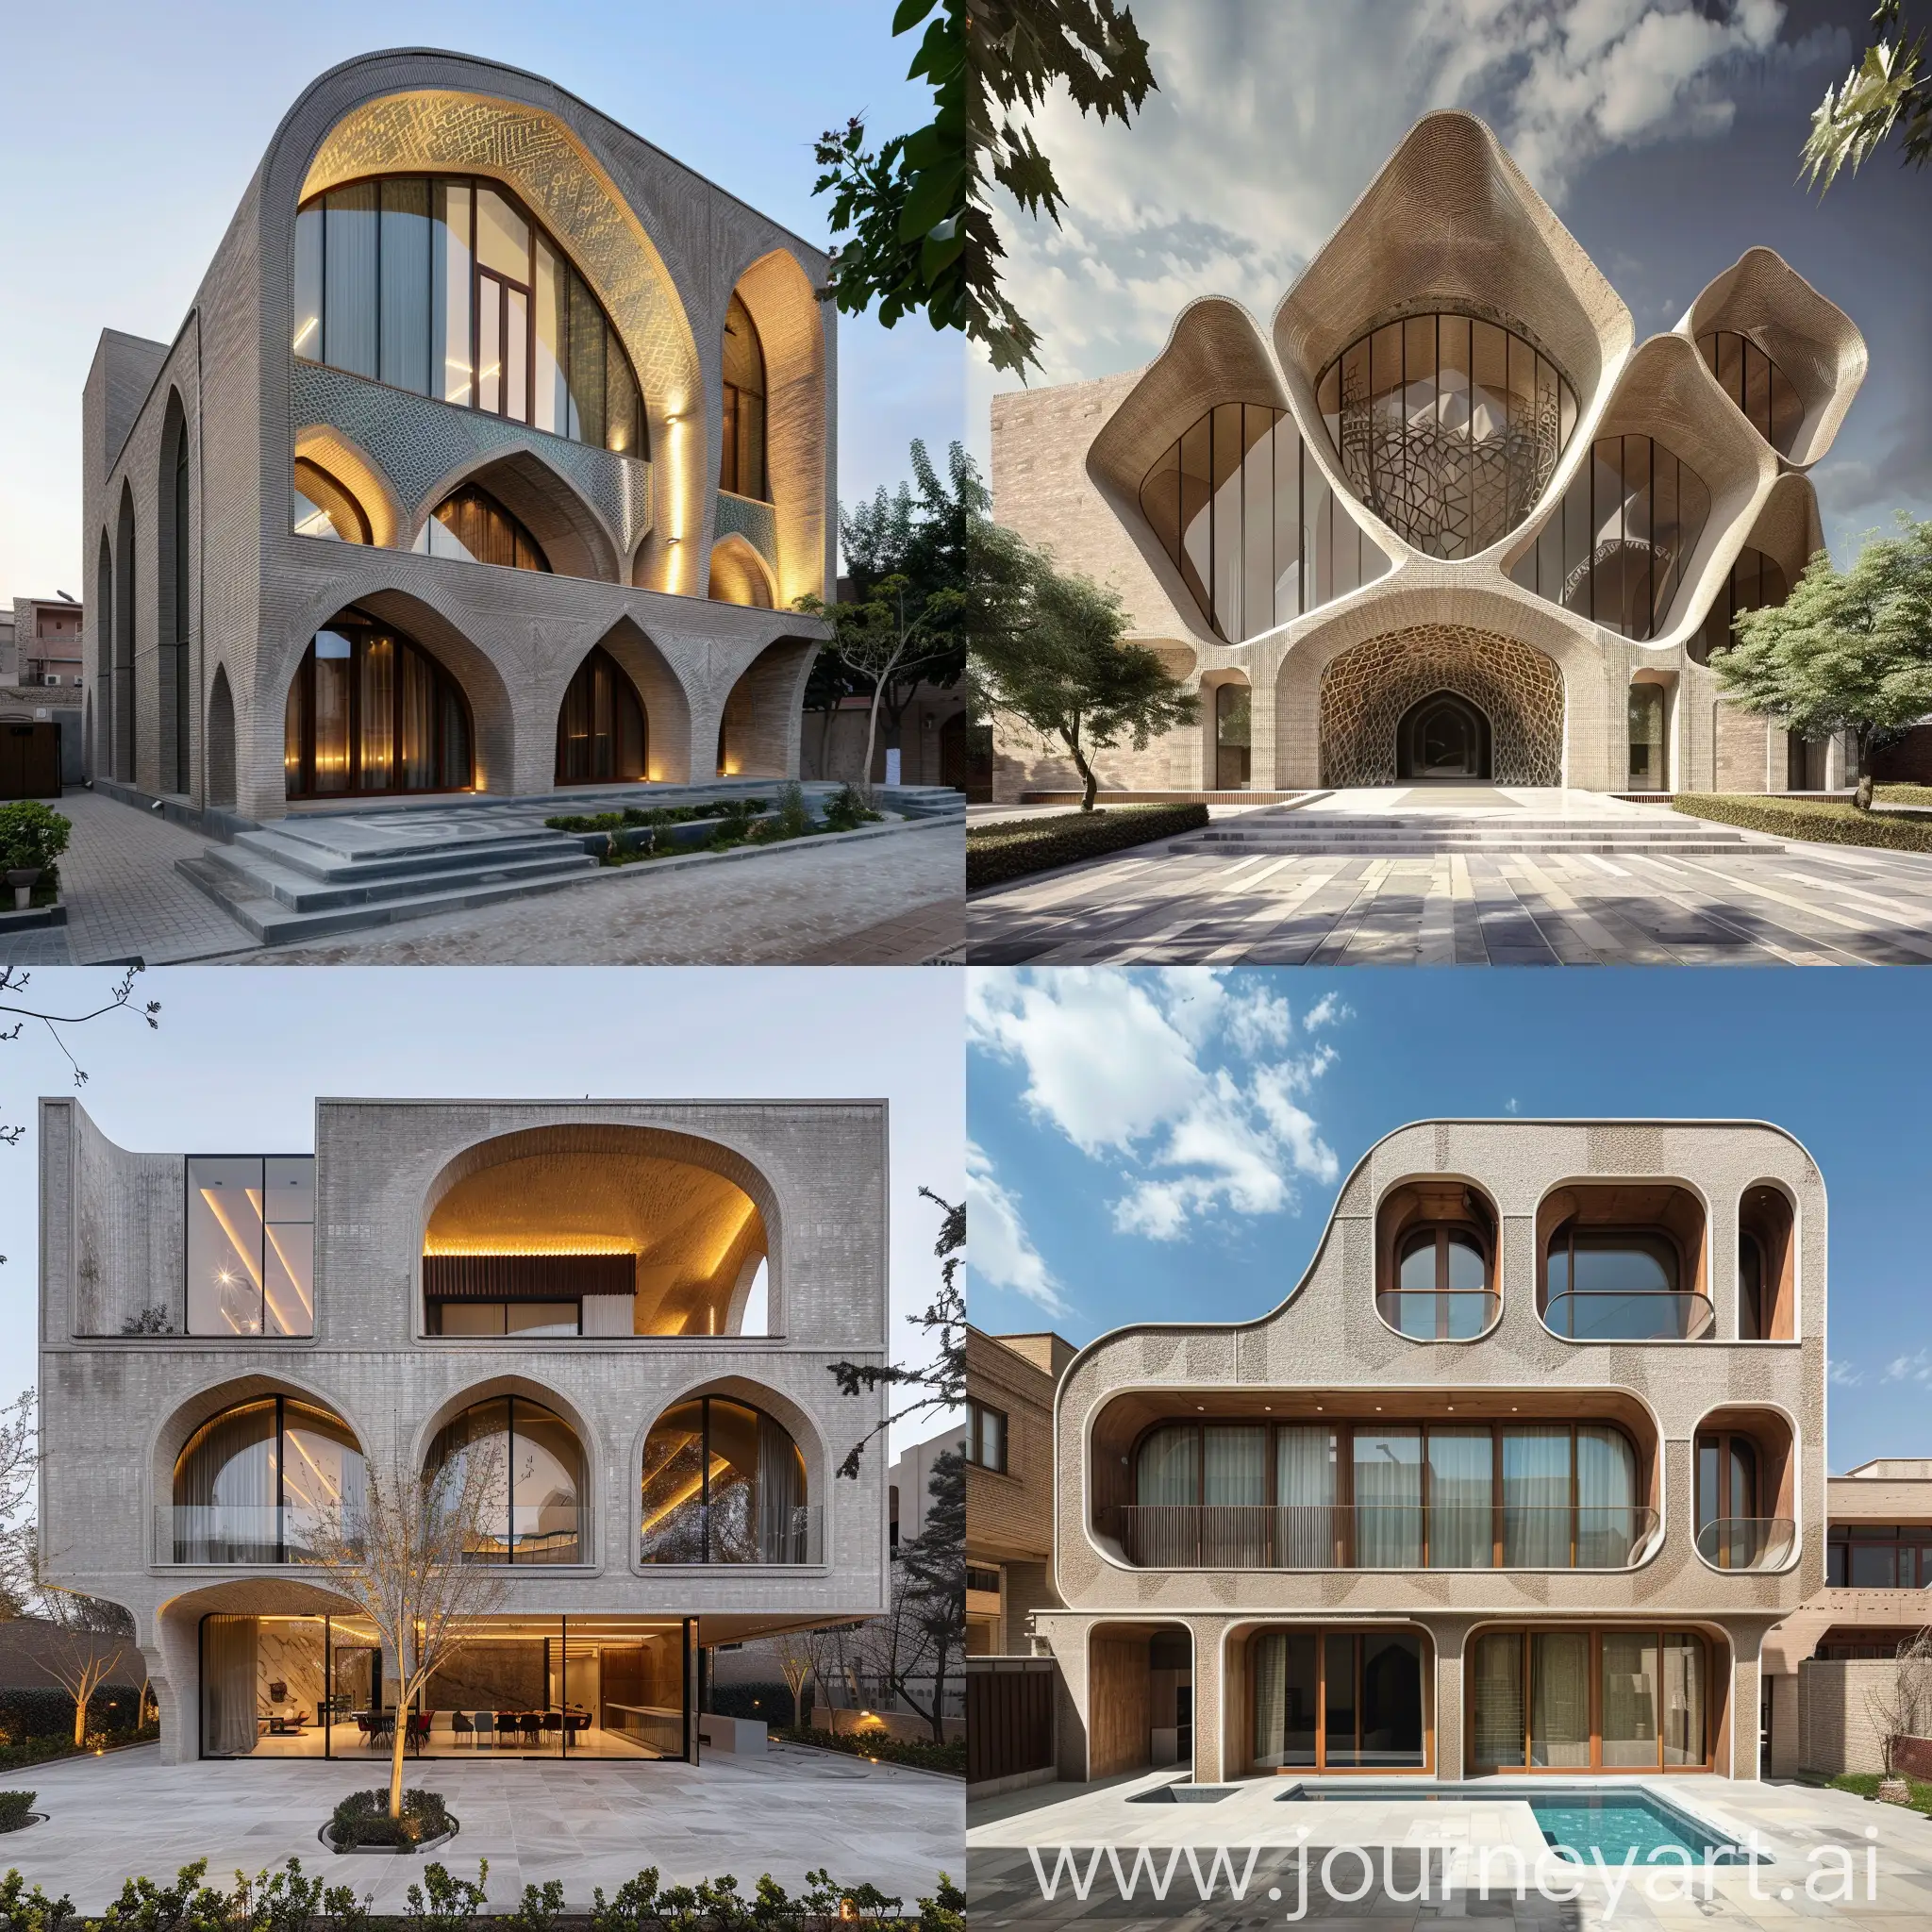 TabrizInspired-Historic-and-Modern-Architectural-Fusion